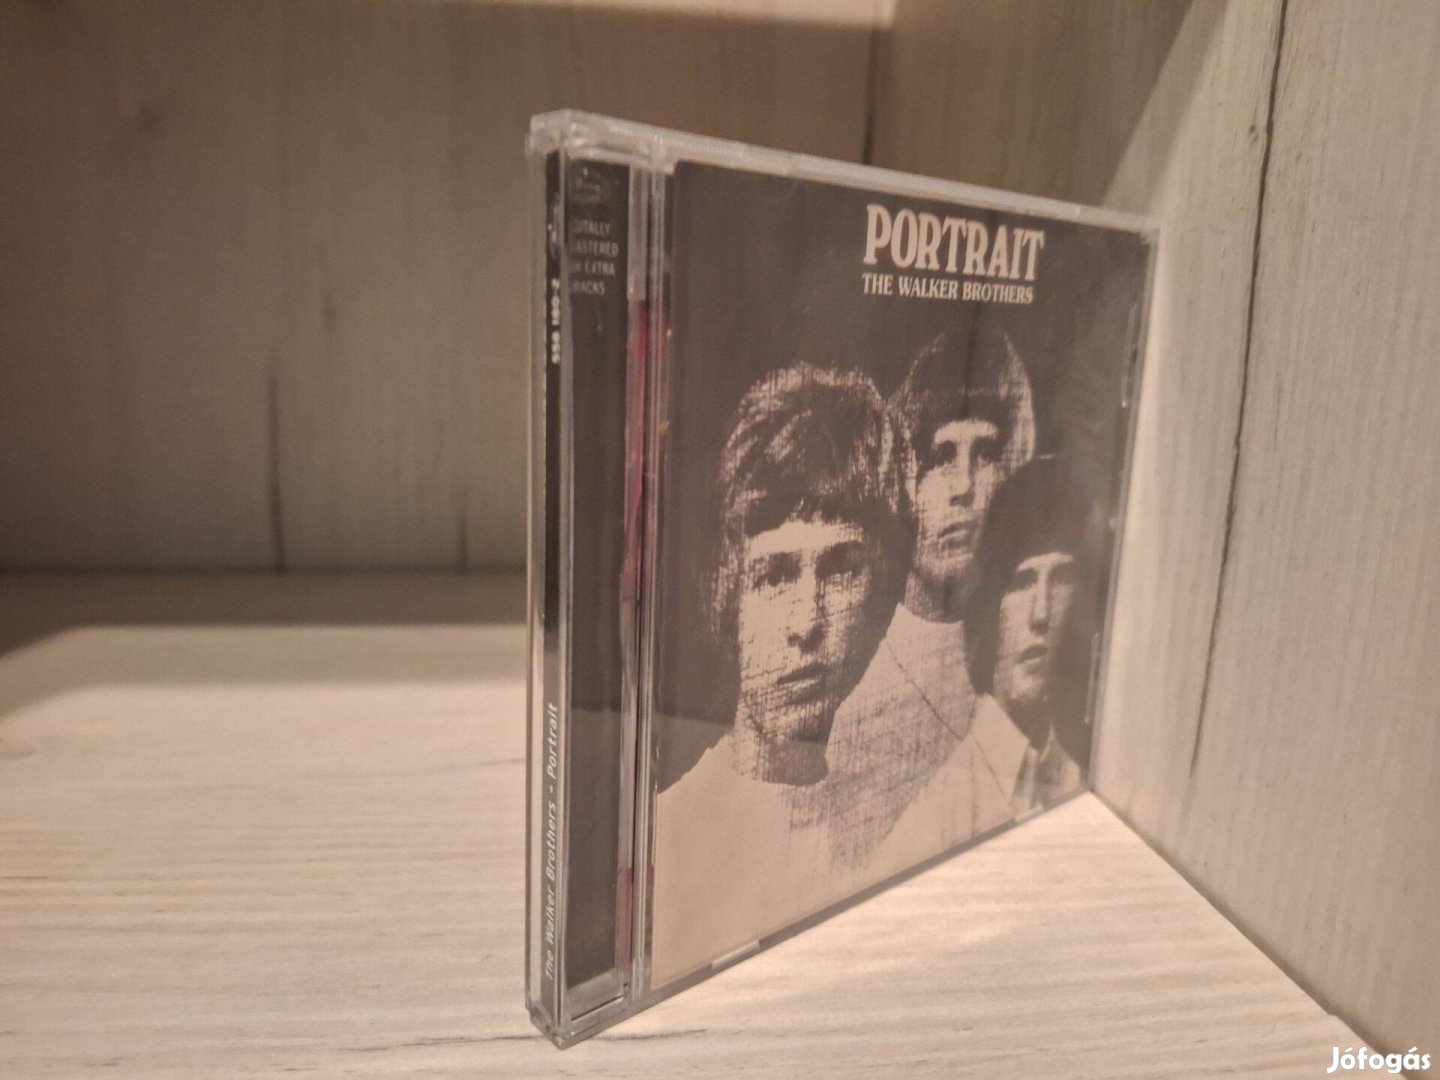 The Walker Brothers - Portrait CD